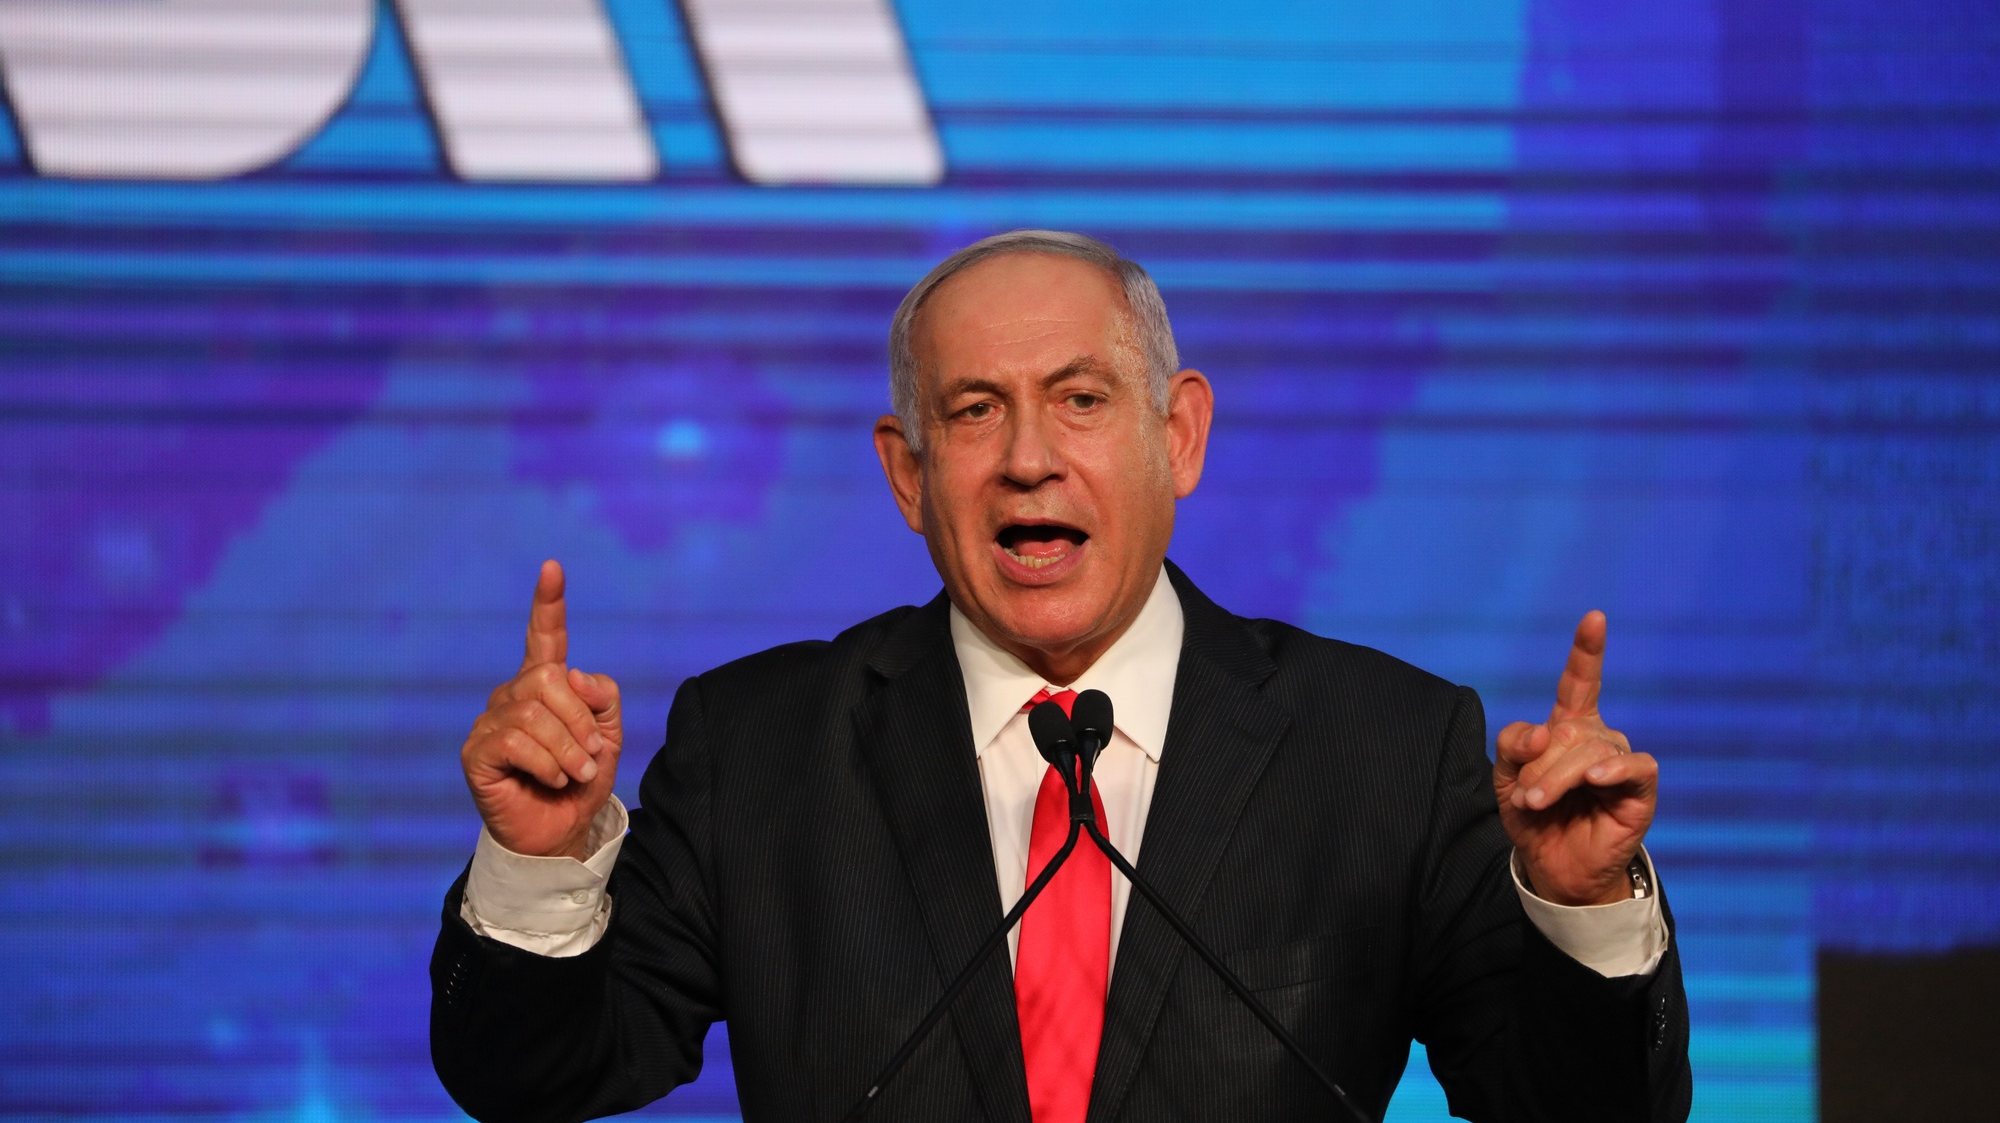 epa09092560 Israeli Prime Minister and Chairman of the Likud Party, Benjamin Netanyahu, greets supporters at the Likud party final election event after early exit polls in Jerusalem, Israel, early 24 March 2021.  EPA/ABIR SULTAN